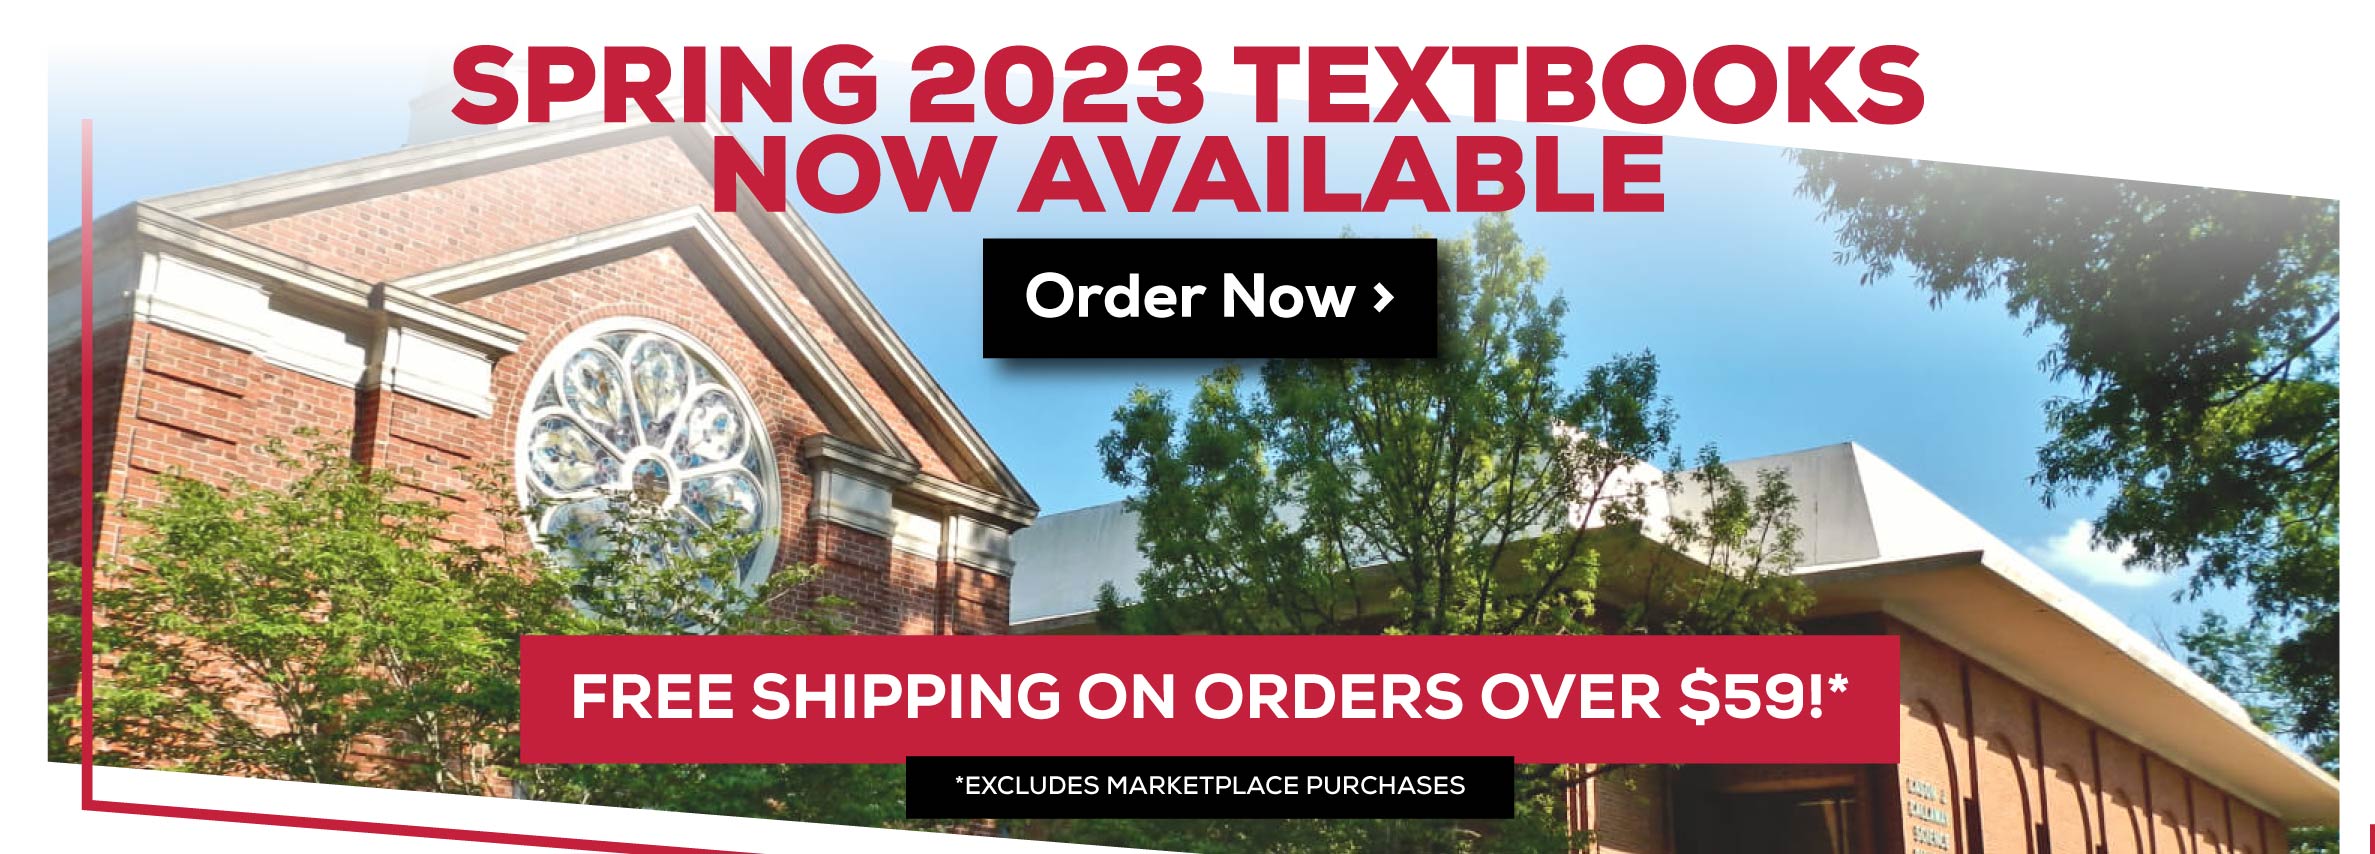 Spring 2023 Textbooks Now Available Order Now - Free Shipping on Orders Over $59!* Excludes Marketplace Purchases